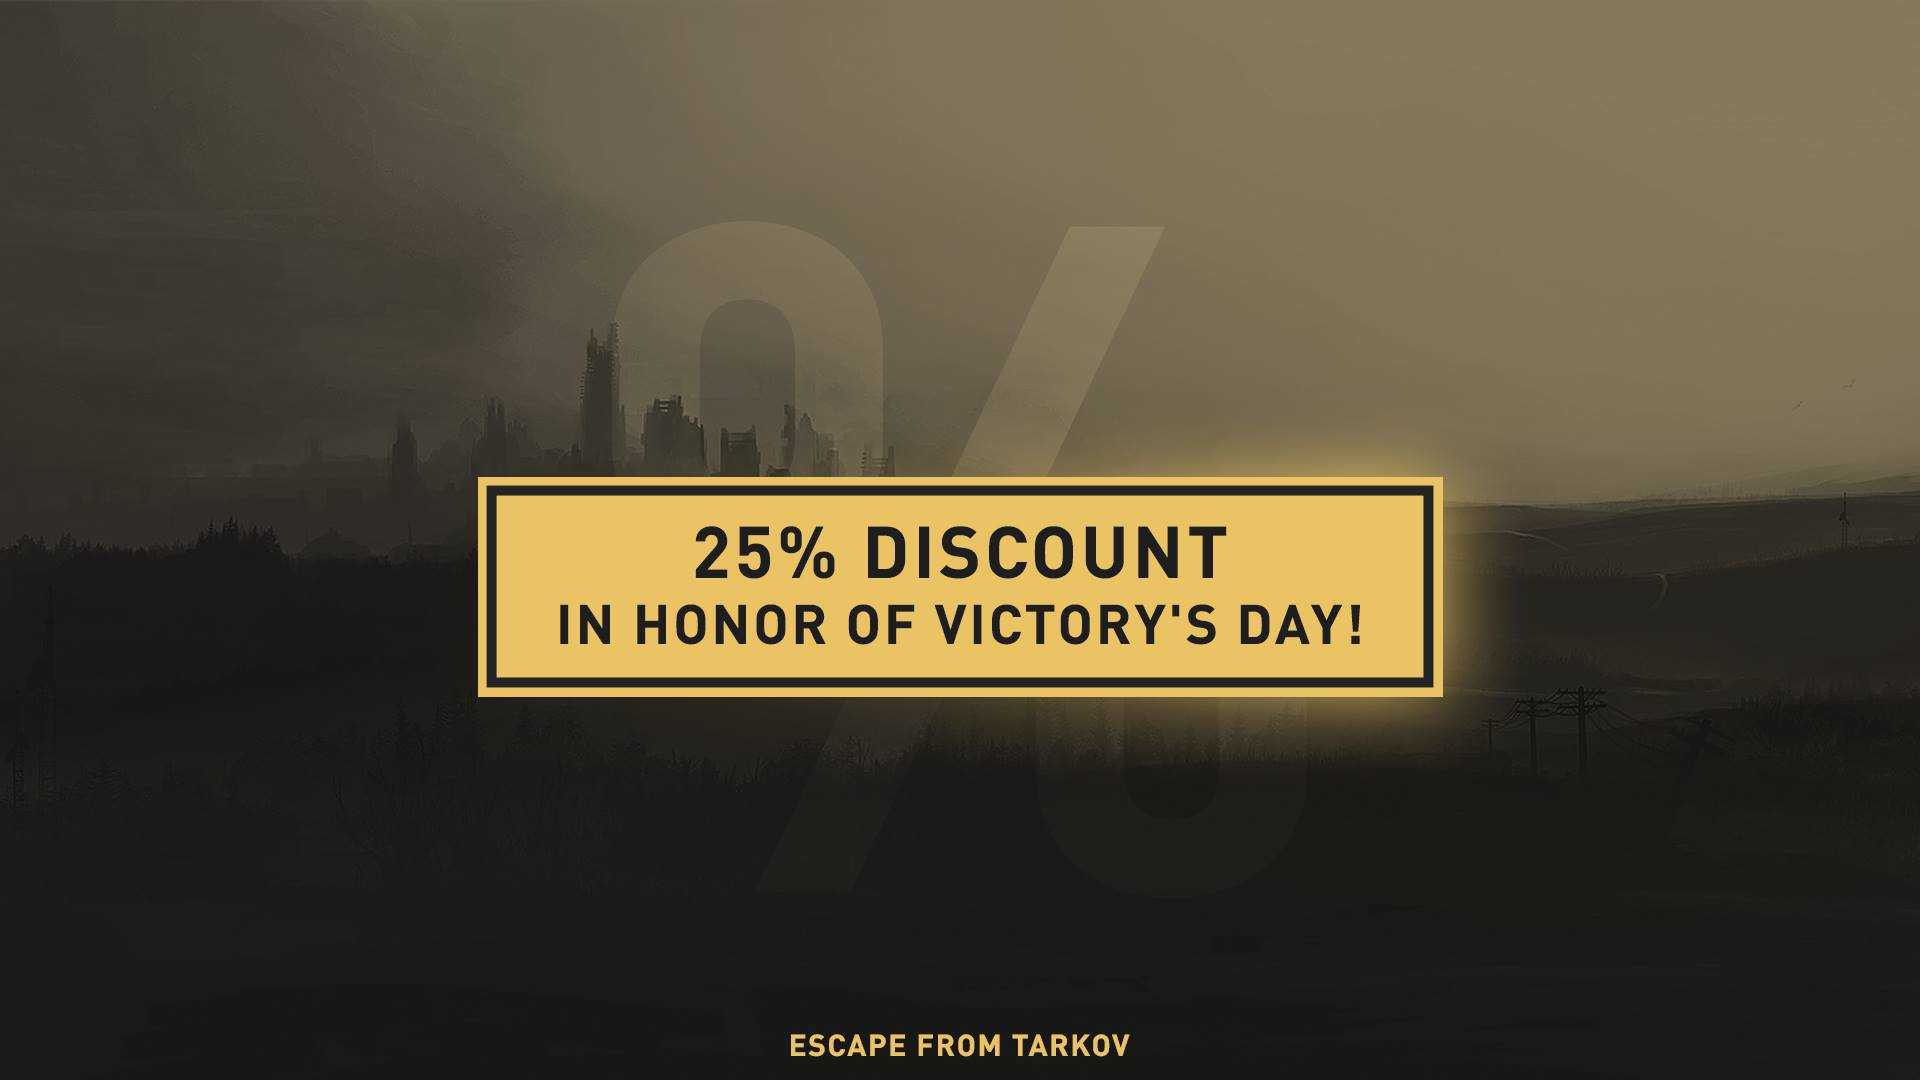 BSG will host an Escape From Tarkov discount starting on May 8